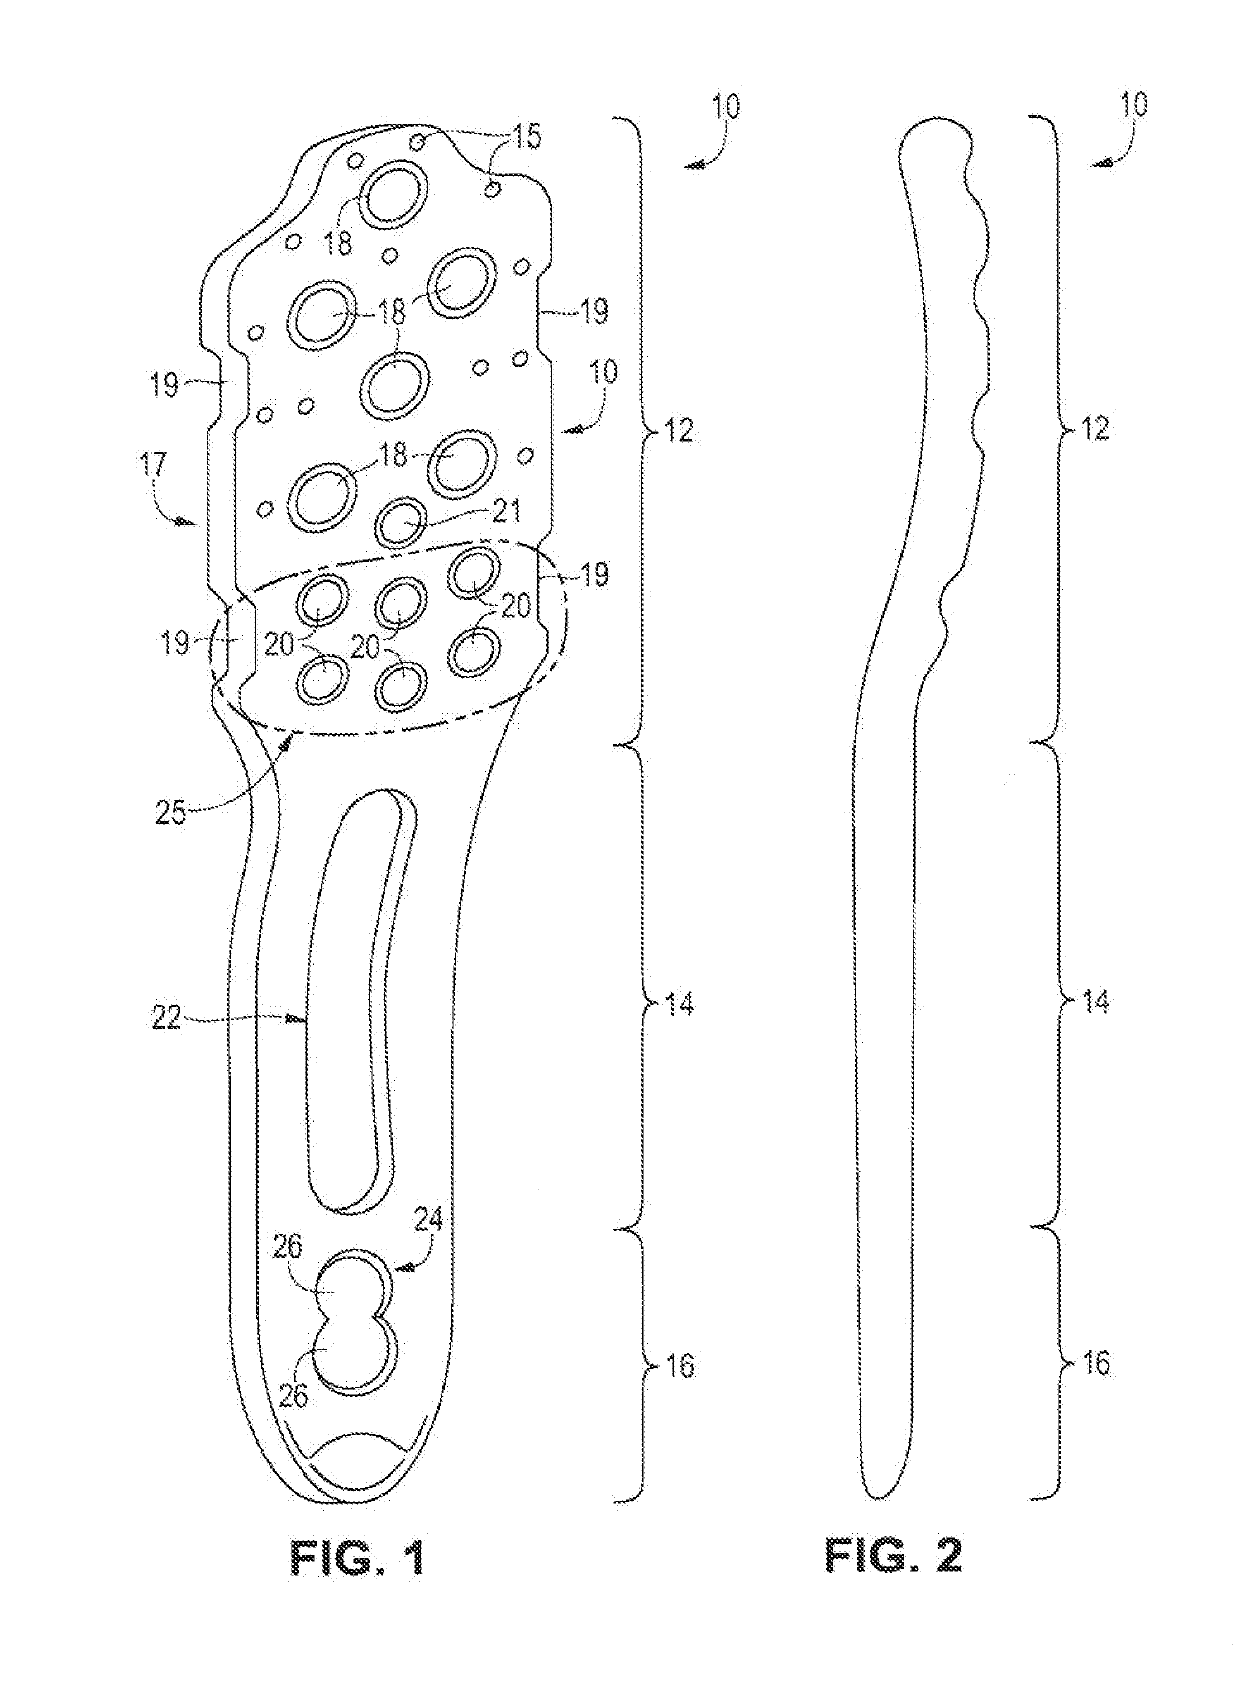 Fixation device for proximal humerus fractures